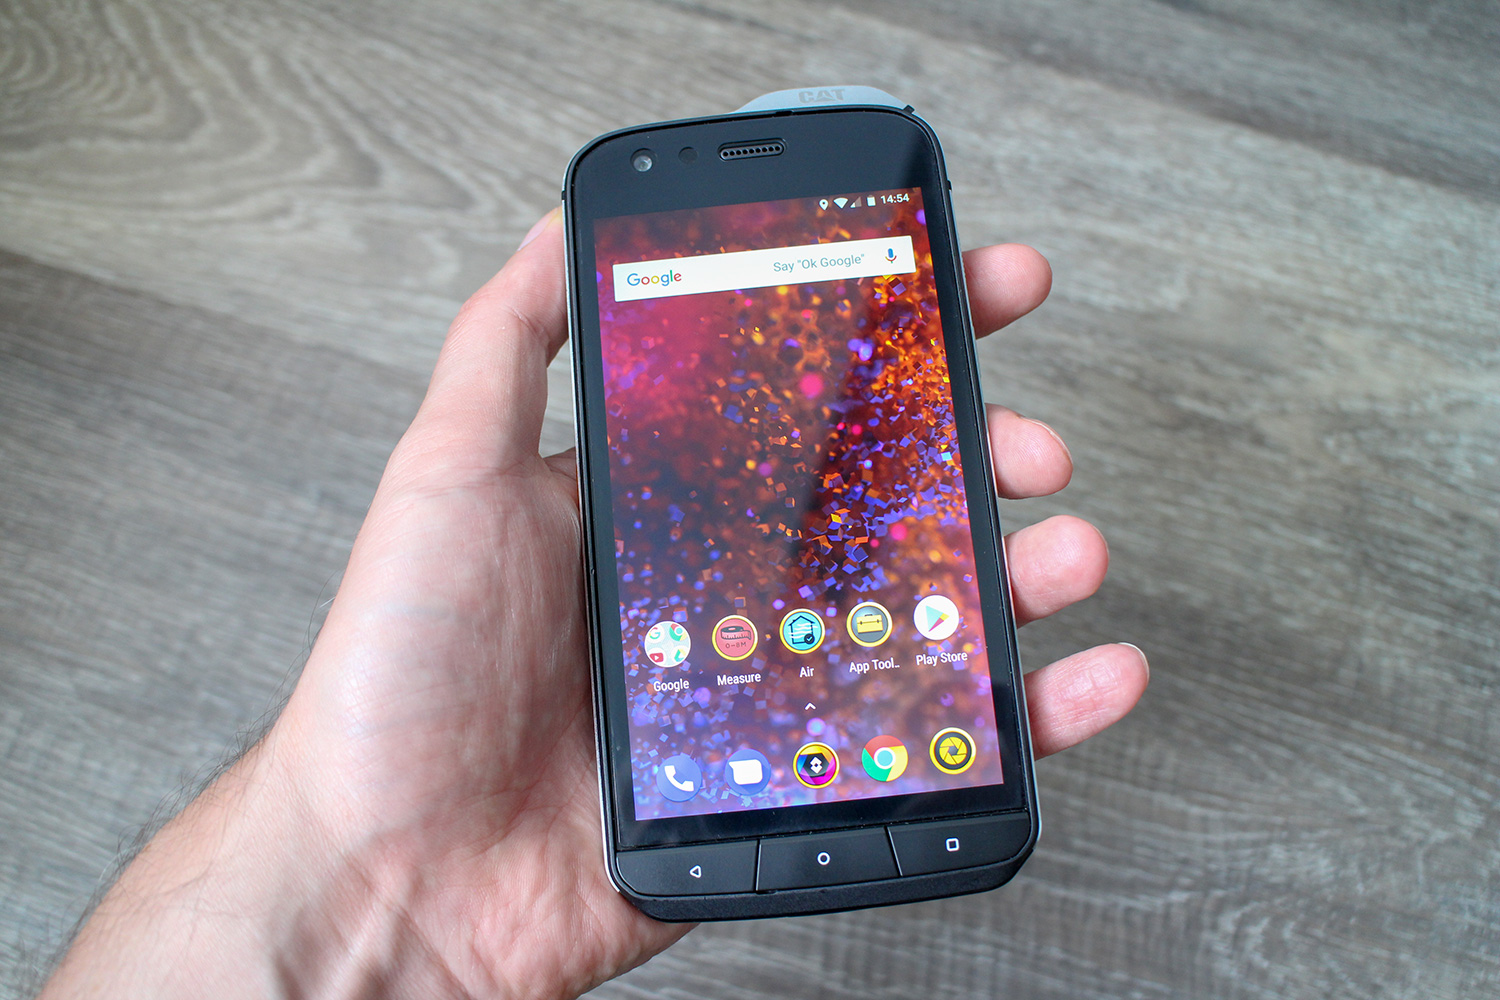 Review del Smartphone CAT S61 -  Analisis